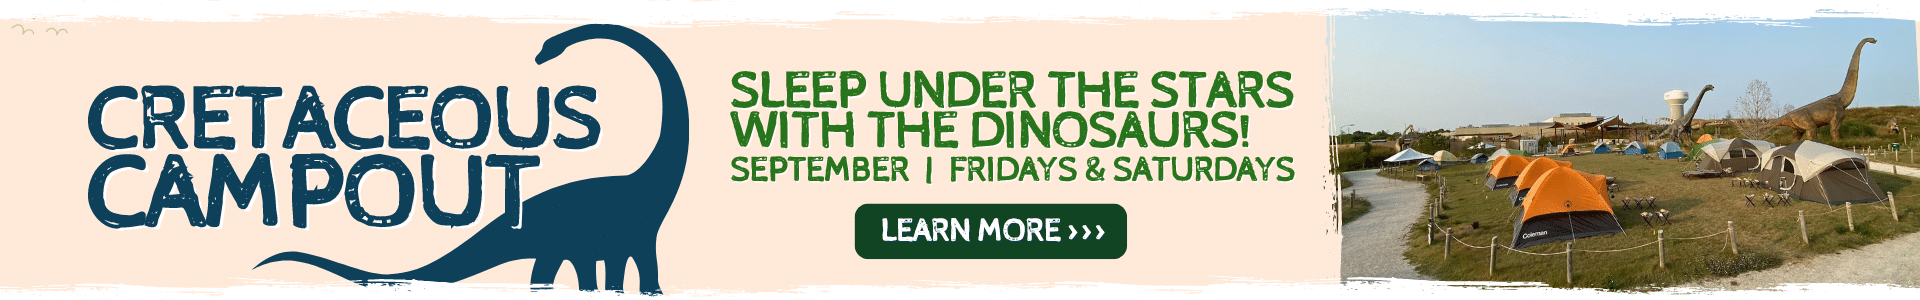 Cretaceous Campout Fridays and Saturdays in September